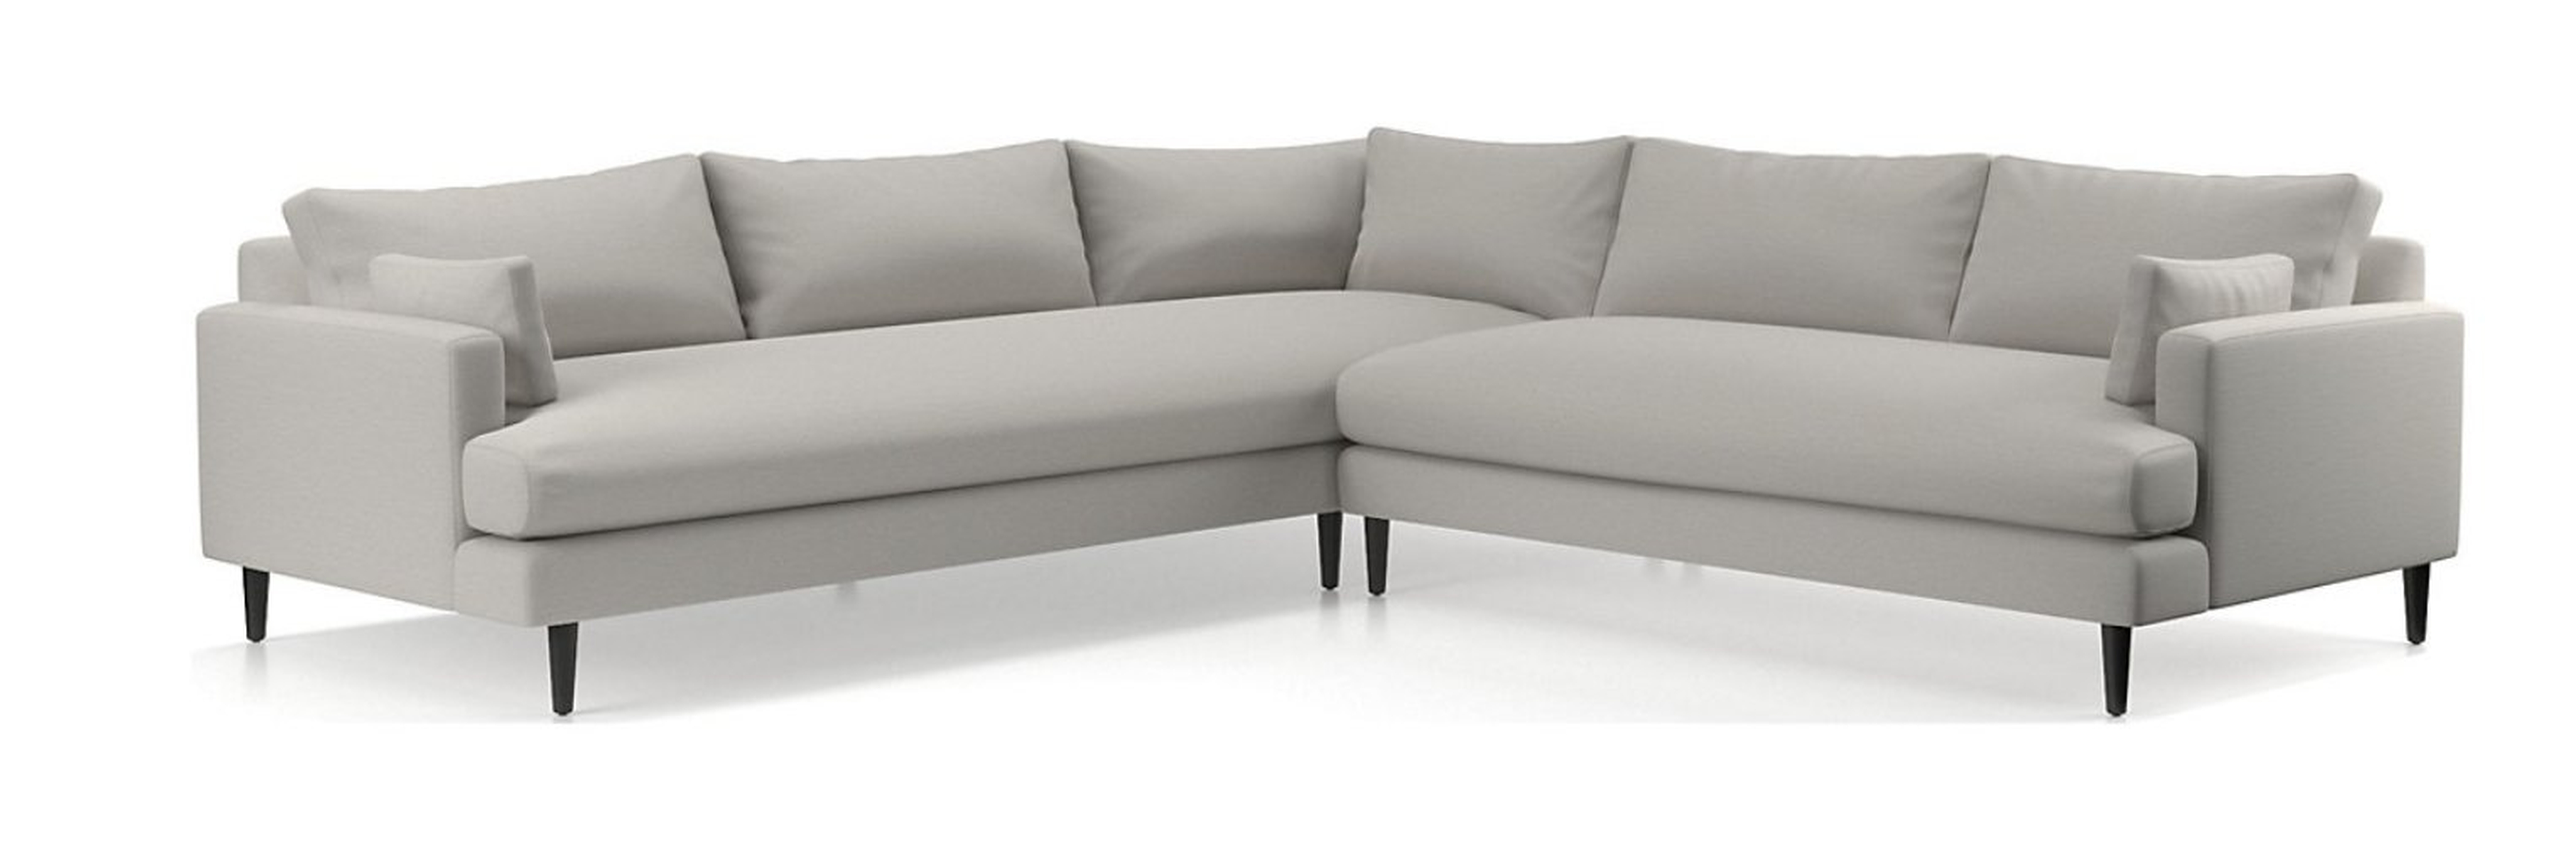 Monahan 2-Piece Left Arm Corner Sofa Sectional - Crate and Barrel